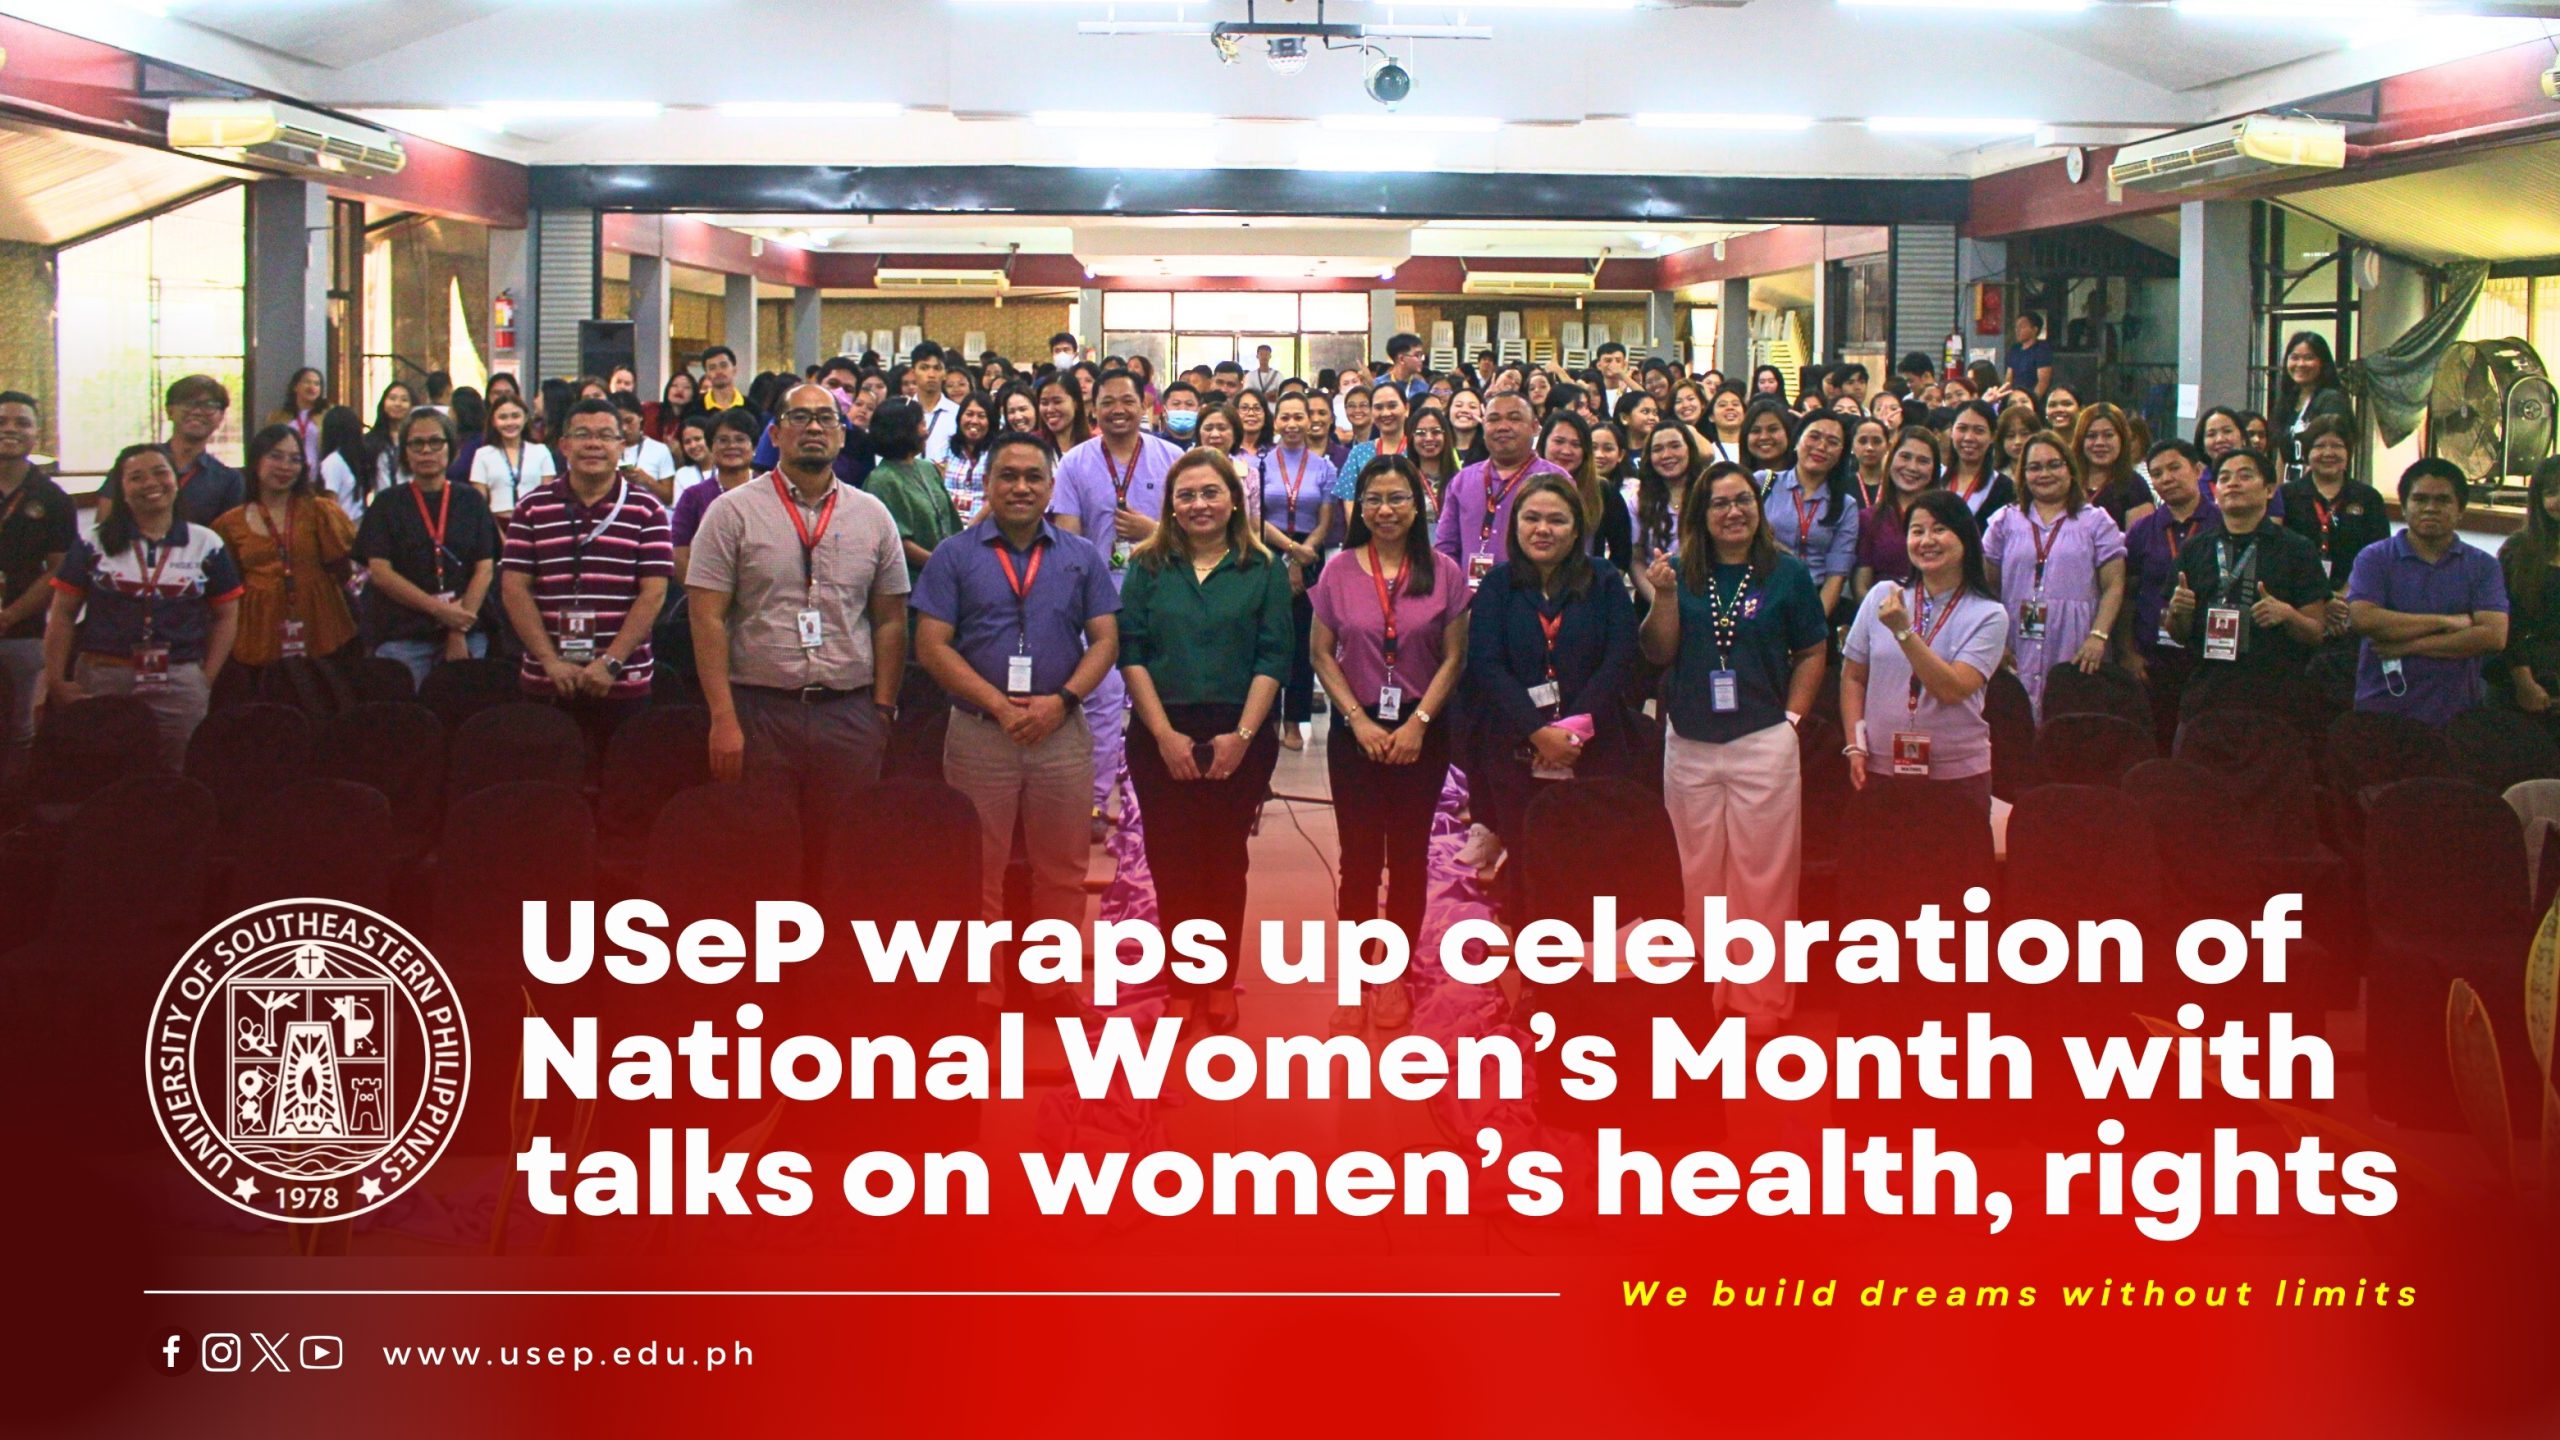 USeP wraps up celebration of National Women’s Month with talks on women’s health, rights